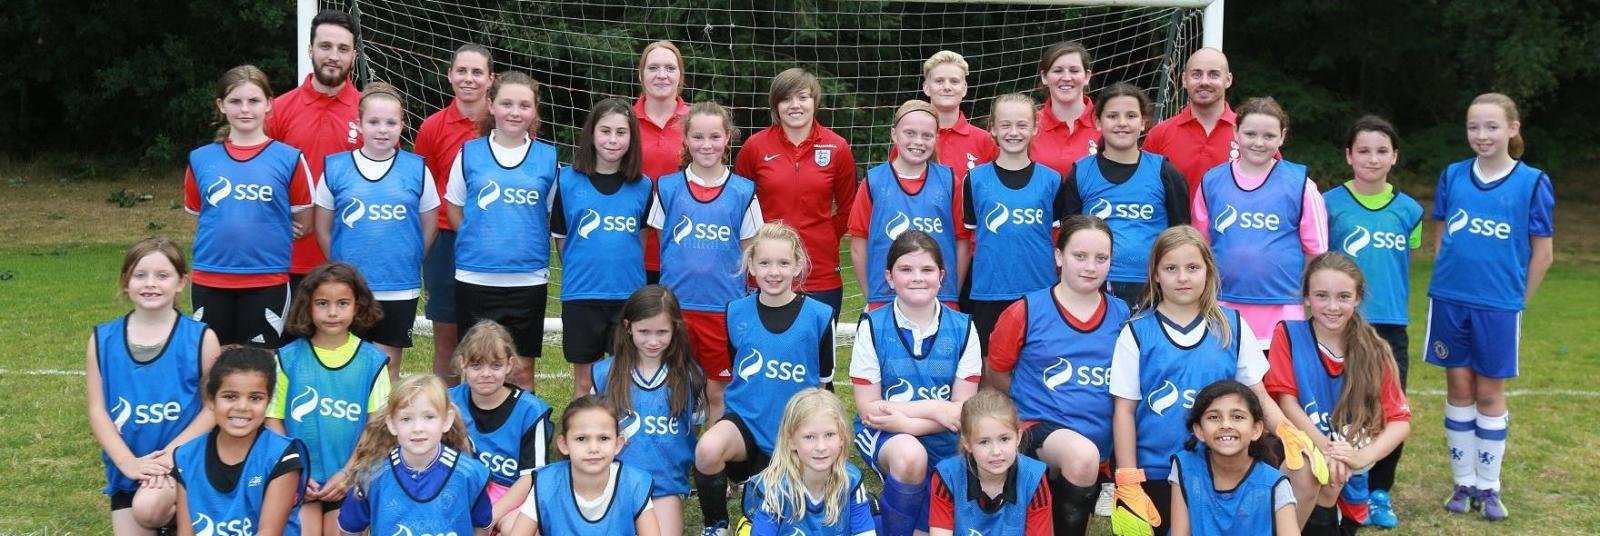 England and Chelsea’s Fran Kirby has high hopes for aspiring girls thanks to an FA and SSE scheme